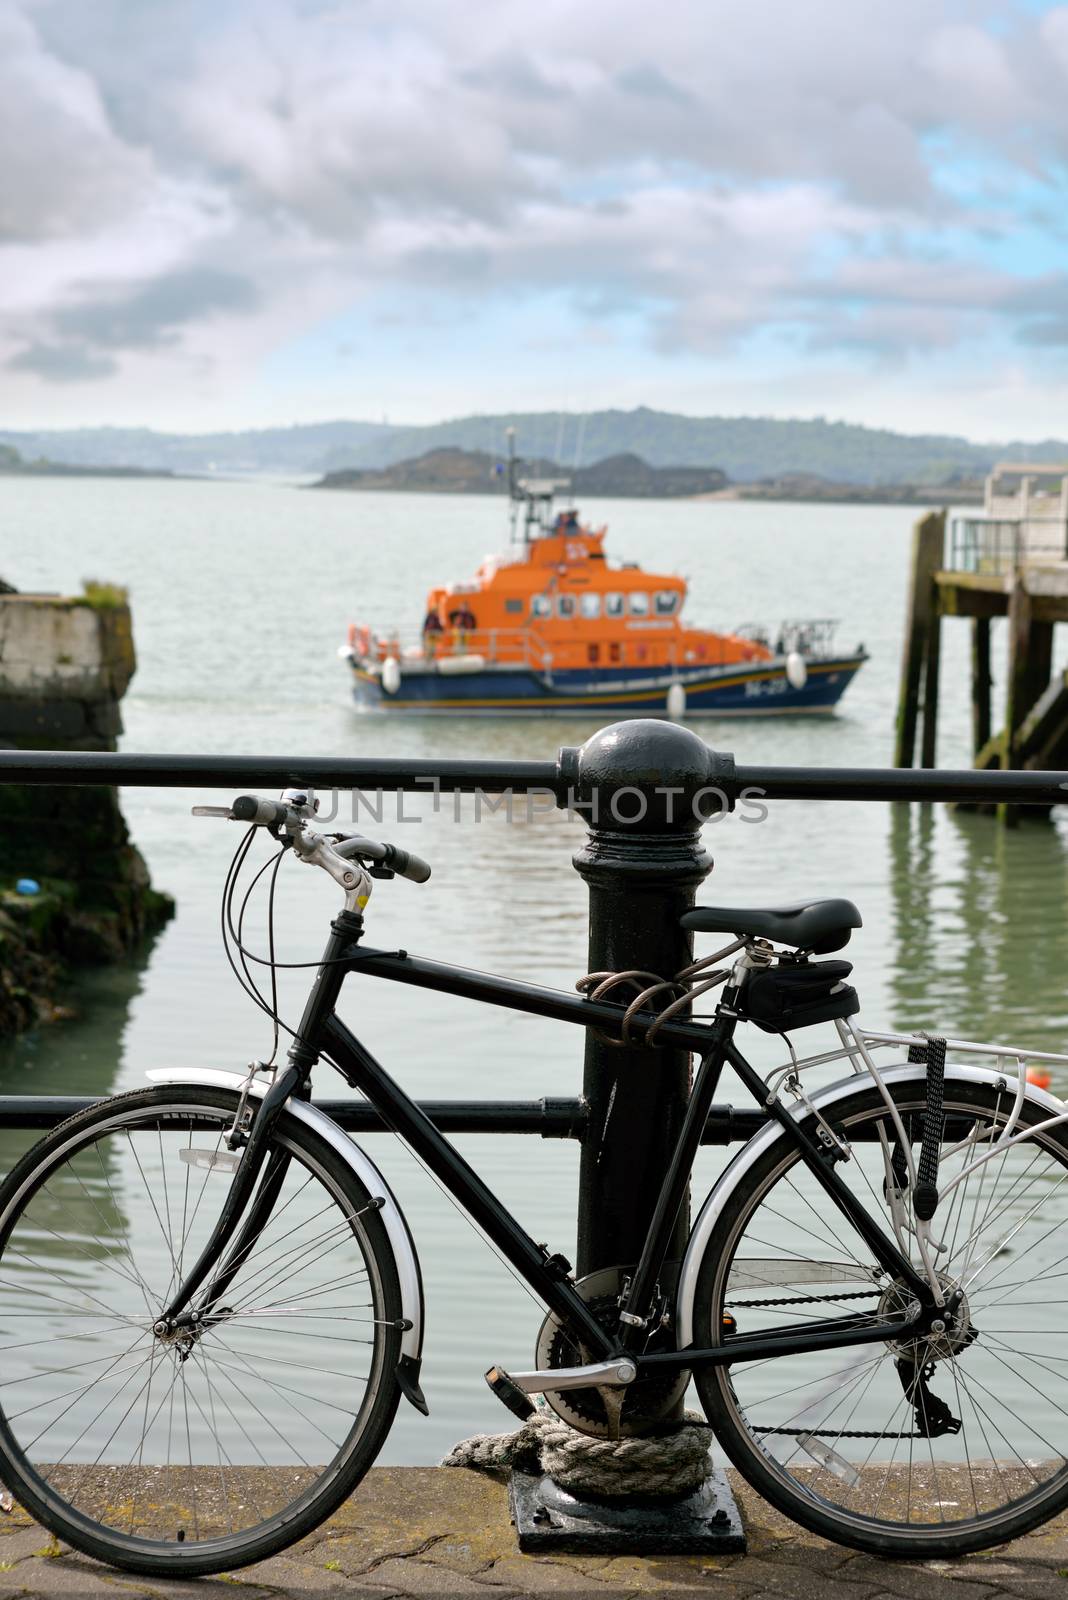 rescue lifeboat in cobh harbour county cork ireland with bicycle in foreground chained to post